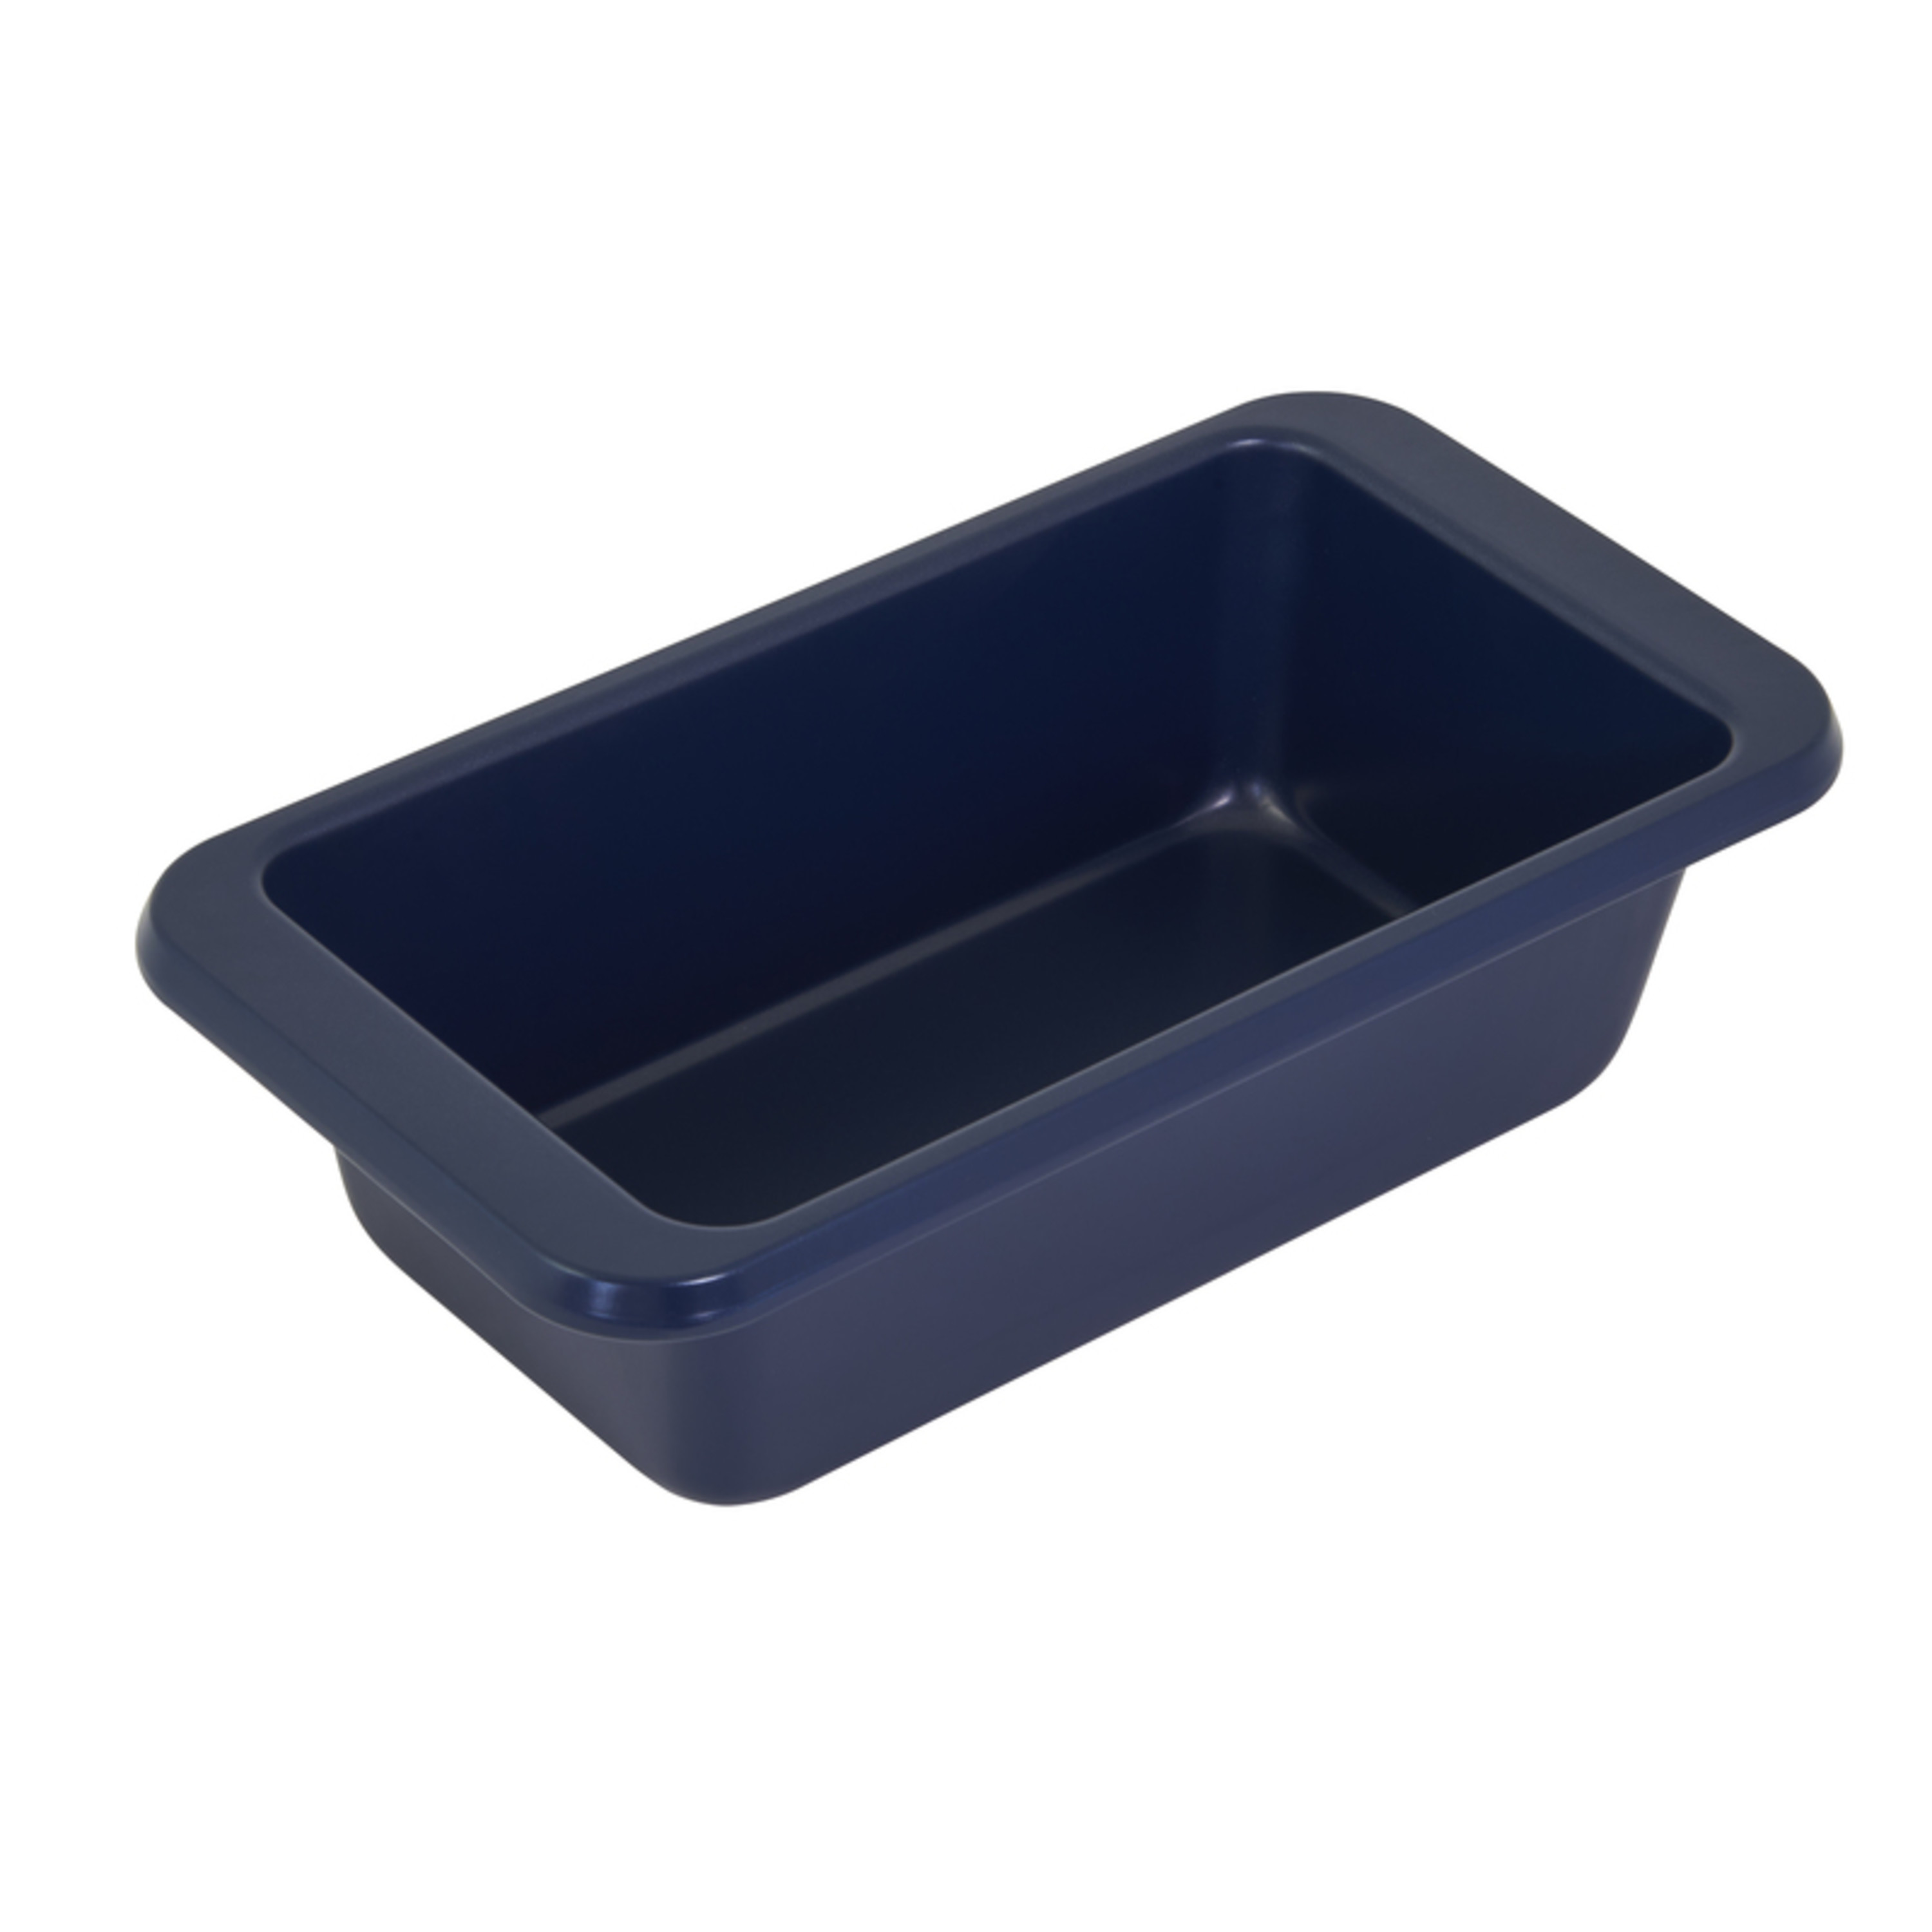 KitchenAid 0.6 Non-Stick Aluminized Steel 9X5 inch Loaf Pan Ink Blue - image 1 of 4